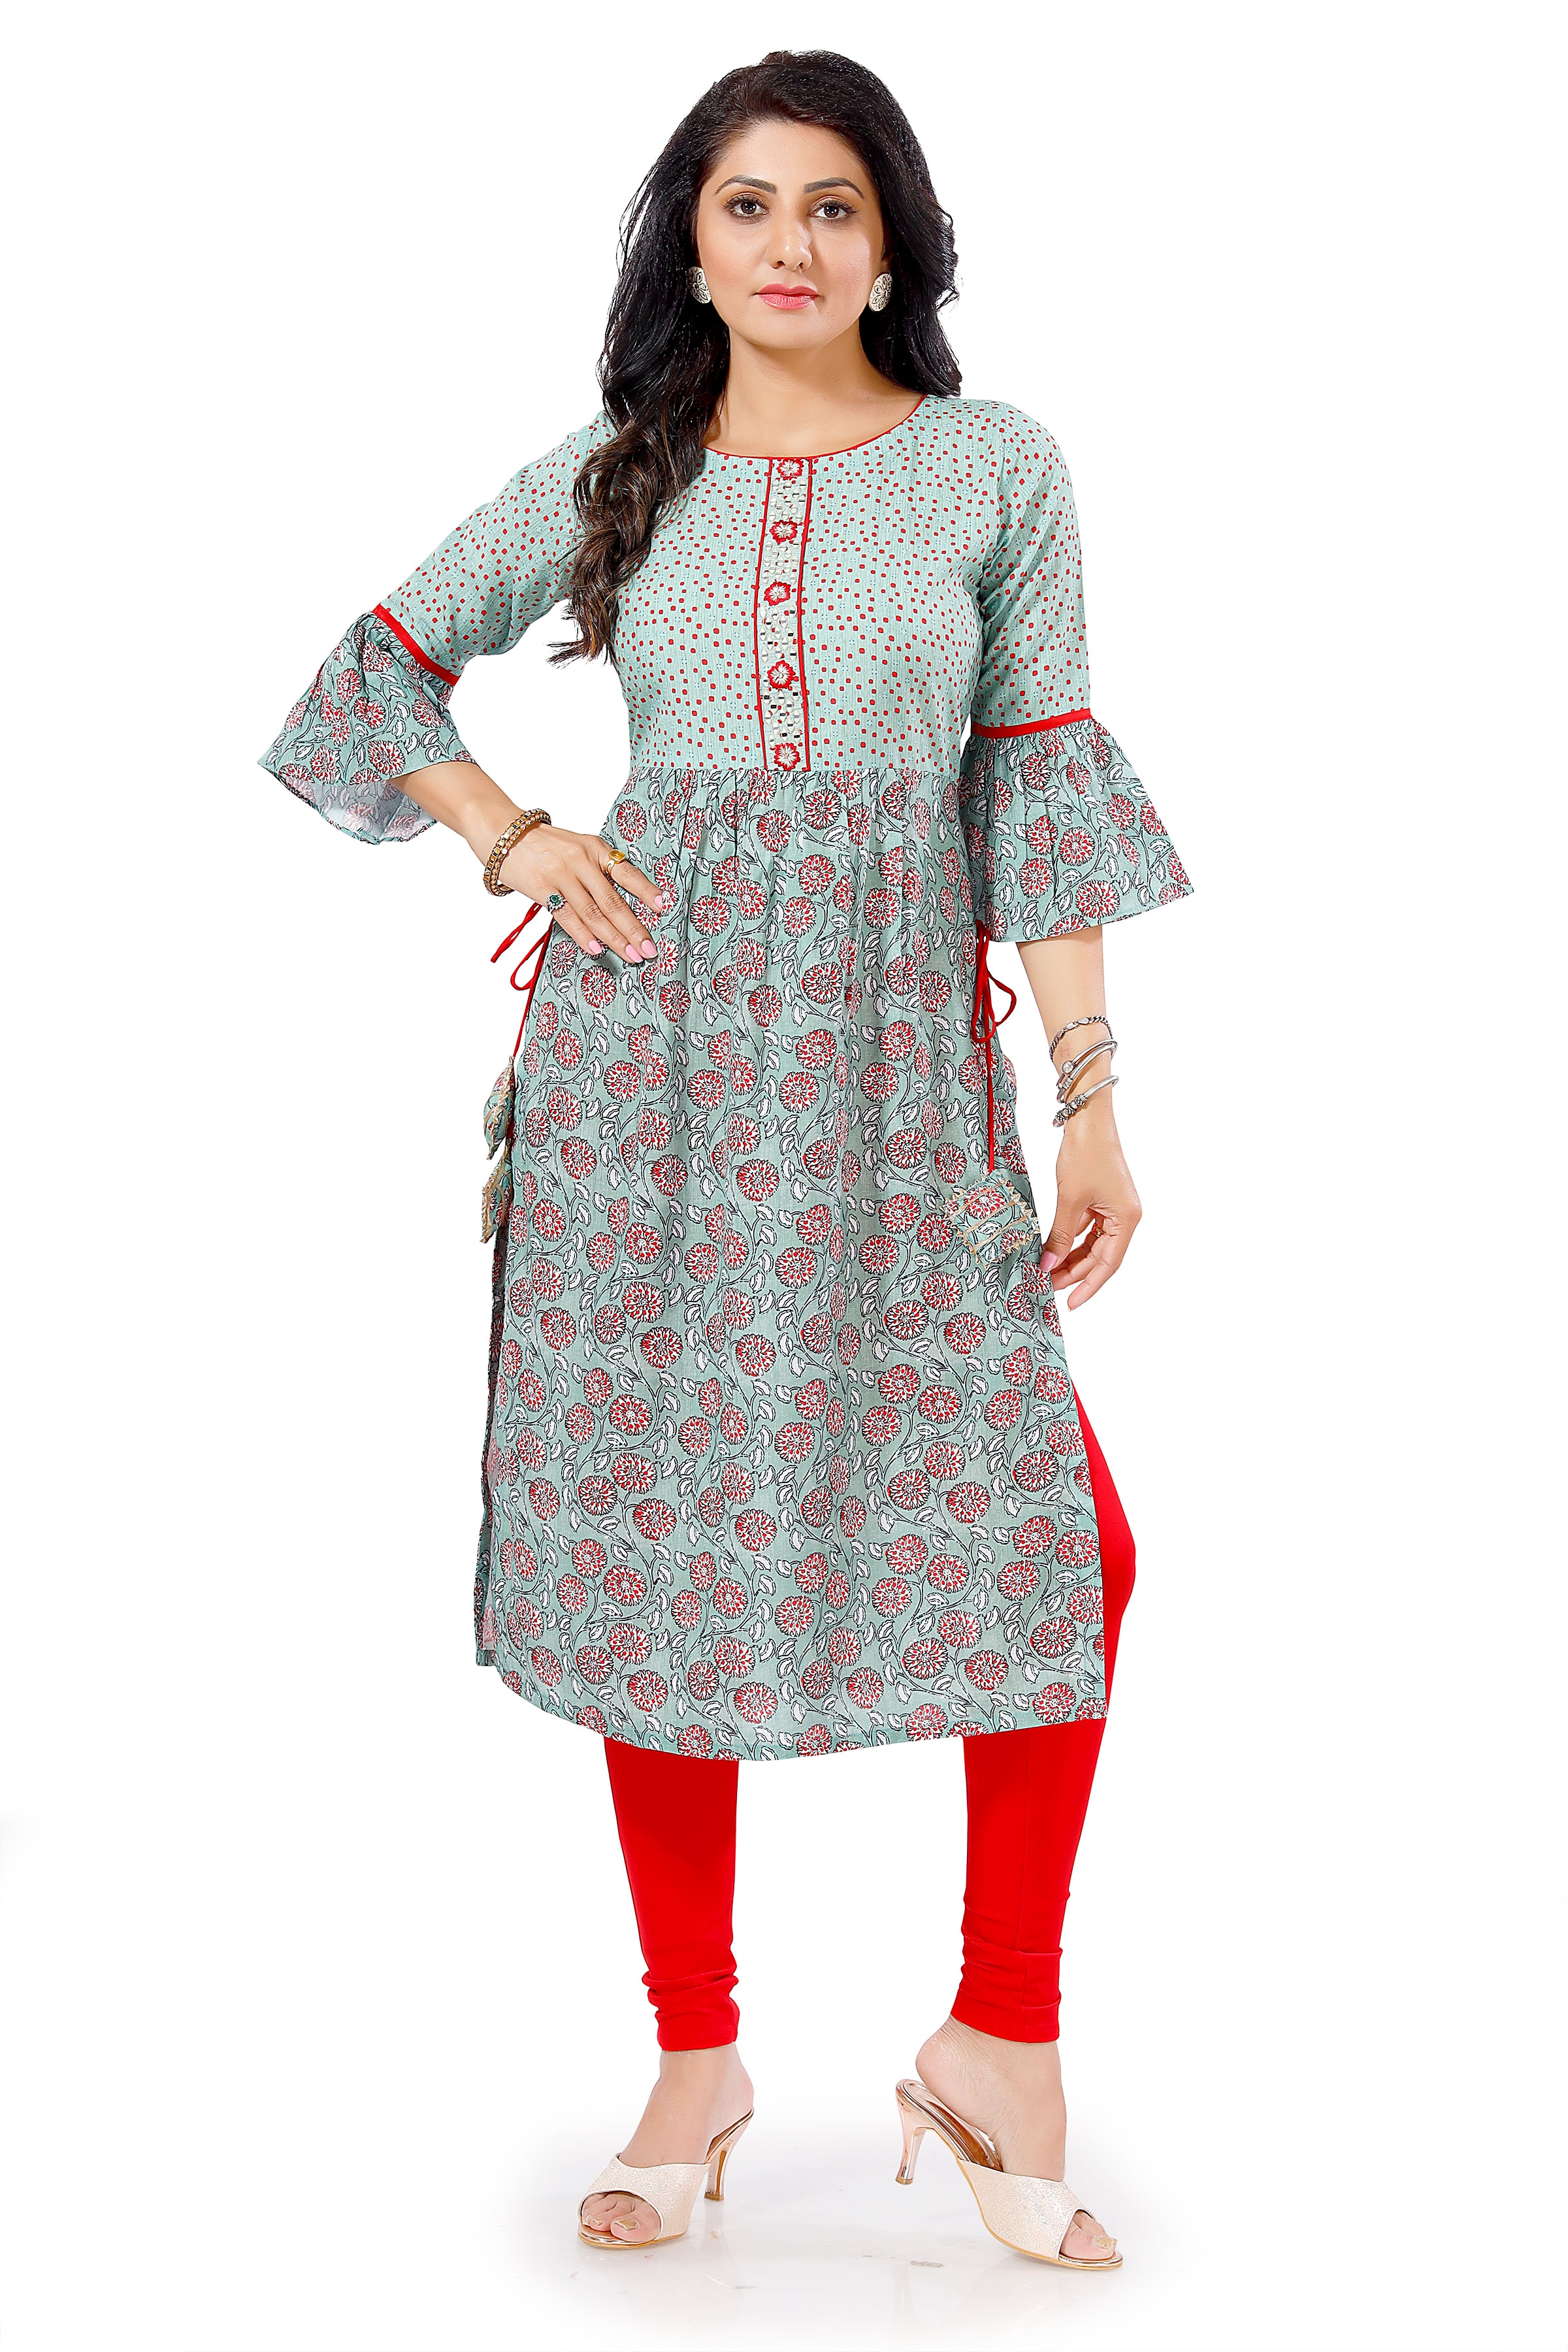 stylist kurtis @ 53% OFF Rs 555.00 Only FREE Shipping + Extra Discount - stylish  Kurti, Buy stylish Kurti Online, Printed Kurtis, dress material, Buy dress  material, online Sabse Sasta in India -